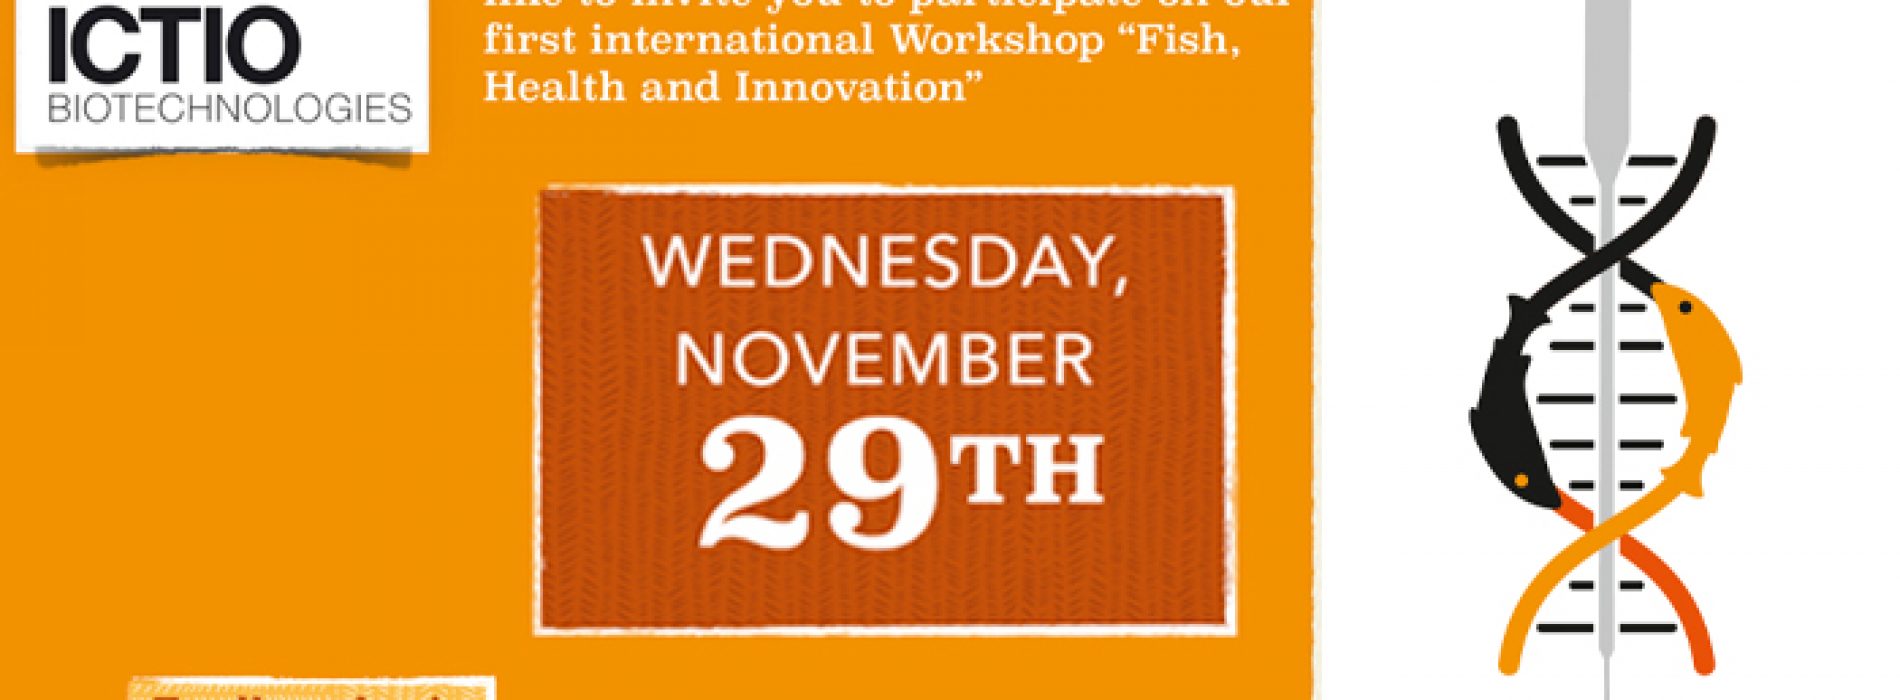 Workshop ICTIO Biotechnologies S. A., would like to invite you to participate on our first international Workshop “Fish, Health and Innovation”